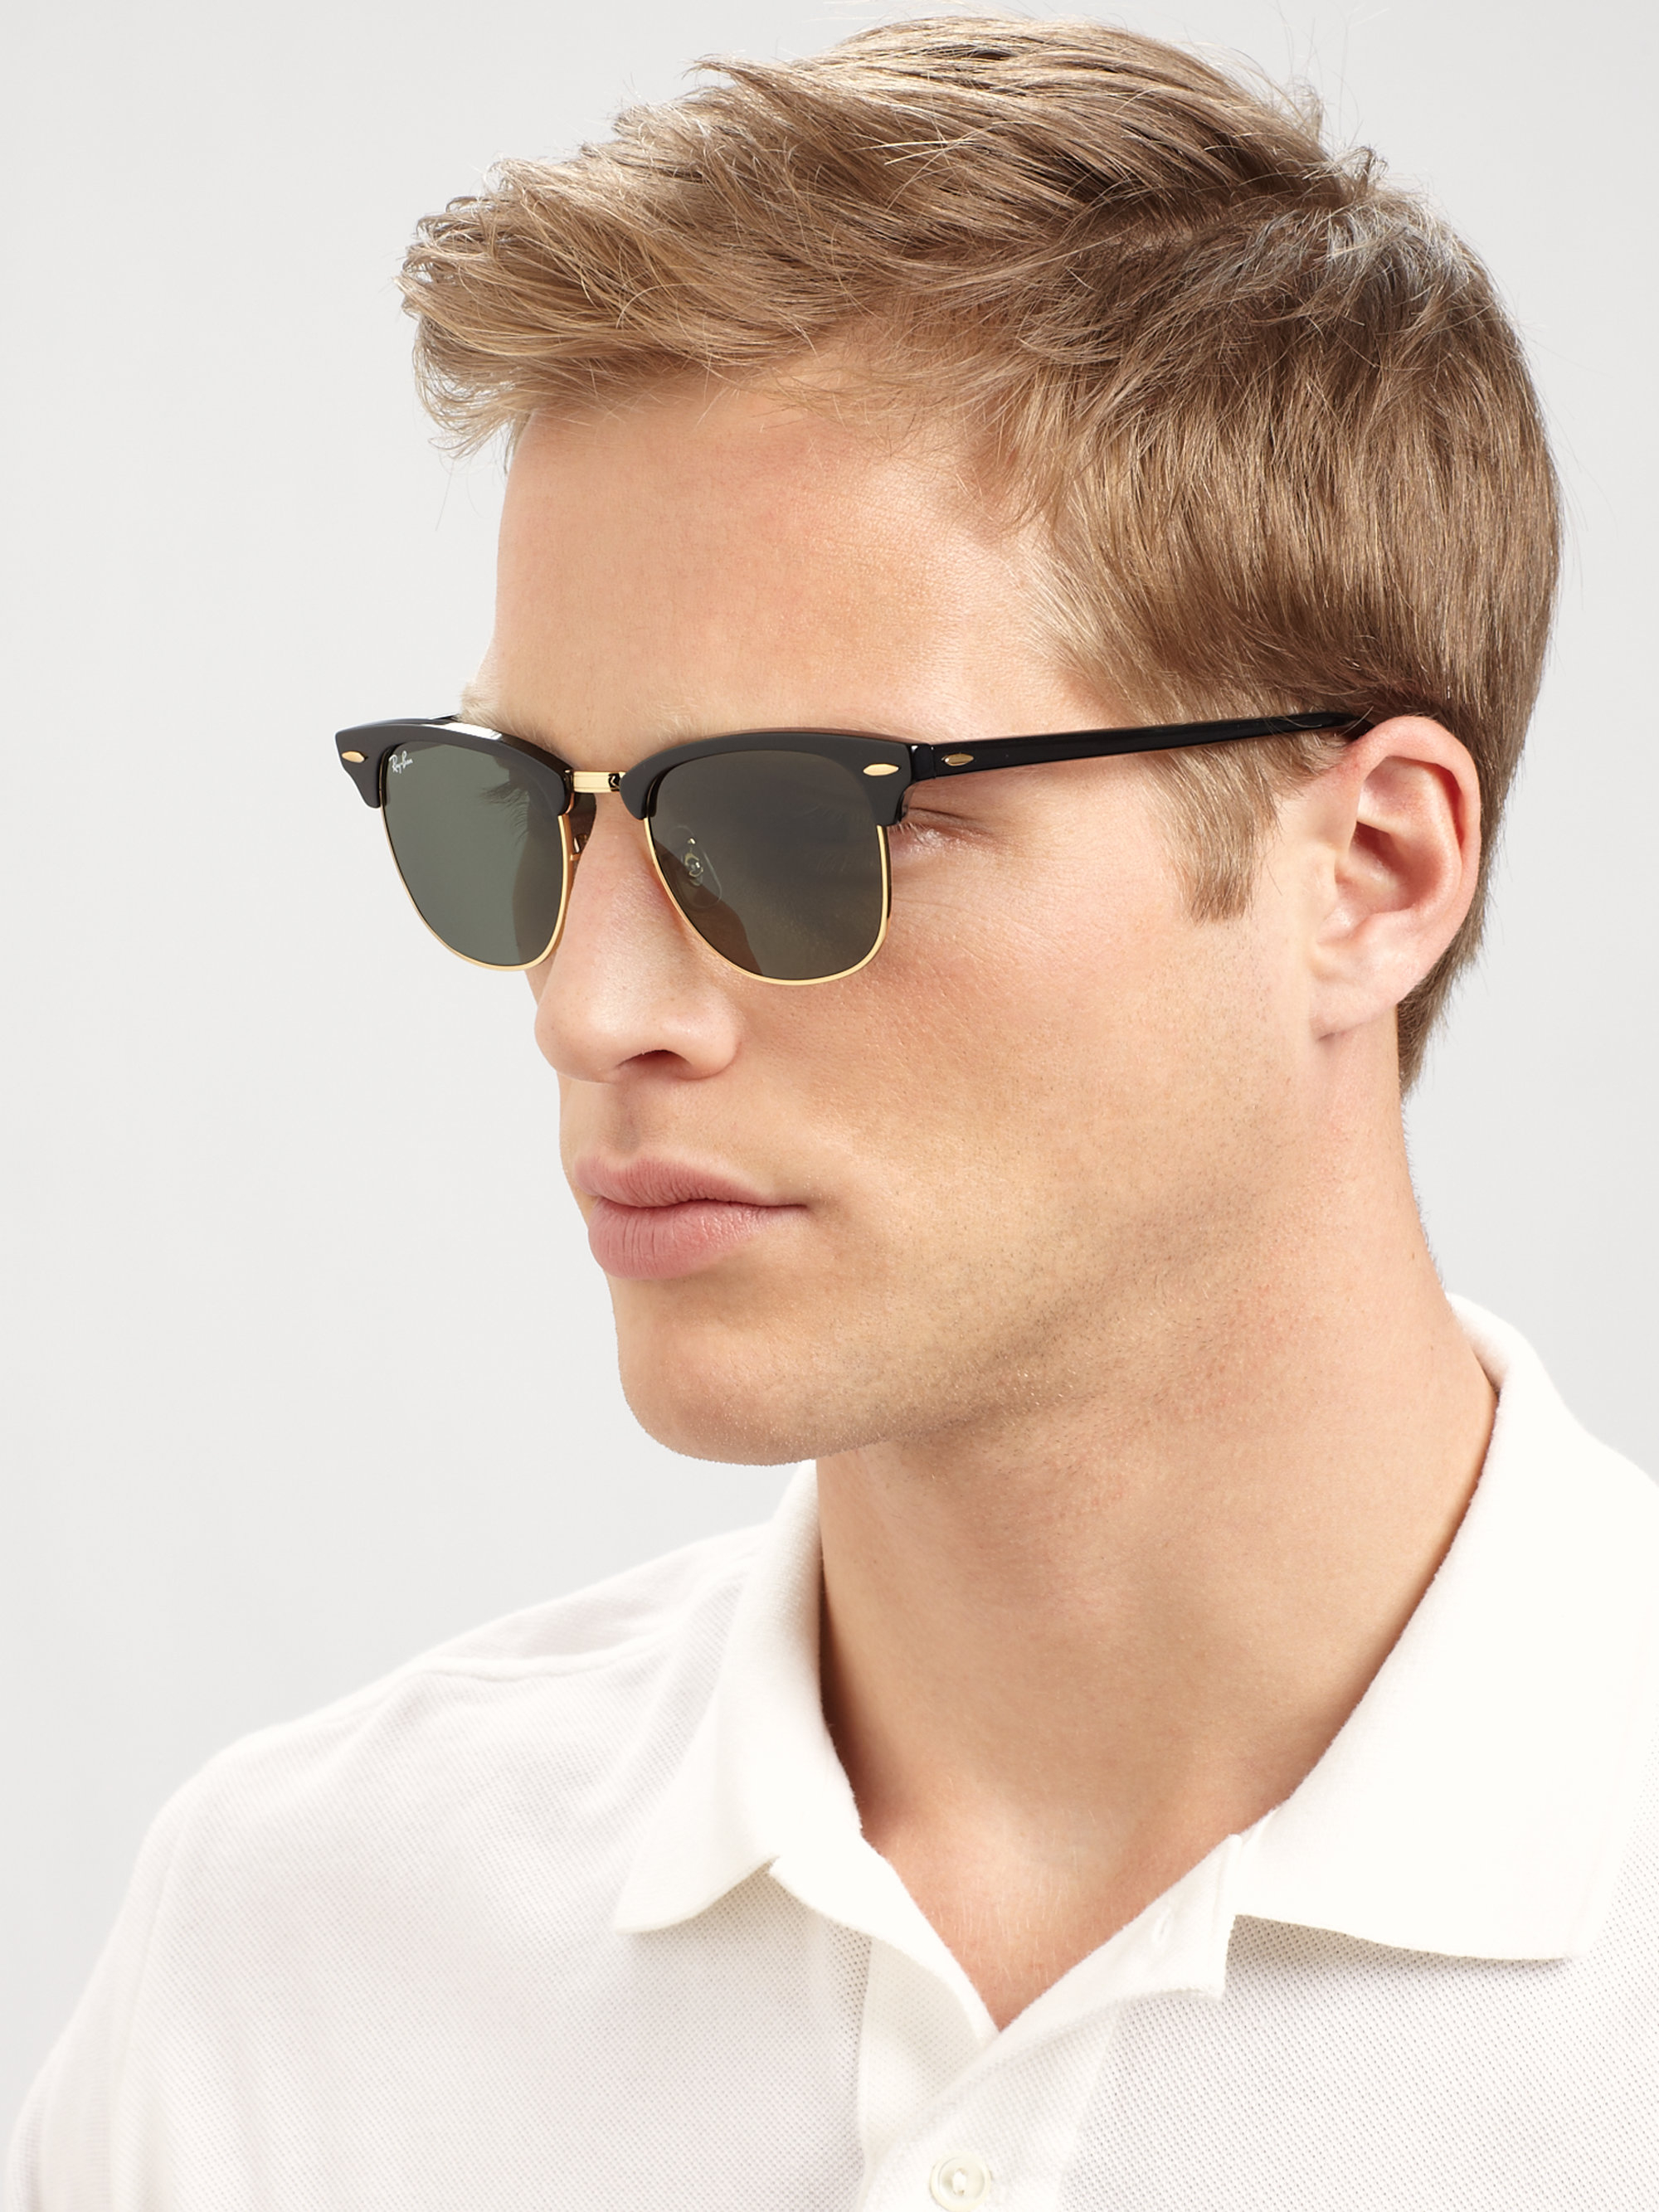 Ray Ban Clubmaster Classic Shop Clothing Shoes Online